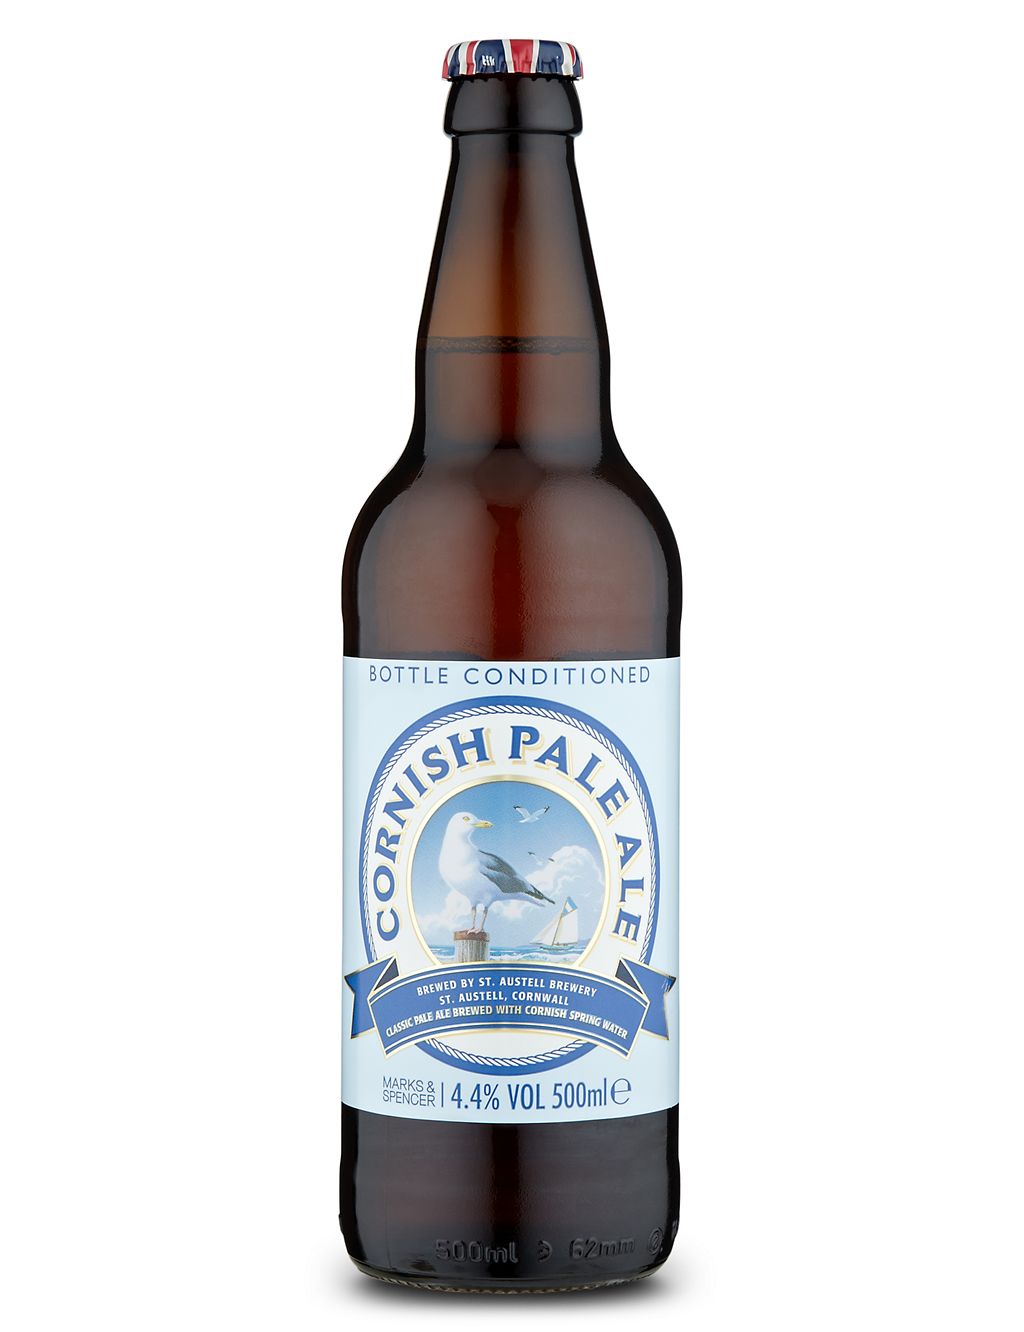 Bottle Conditioned Cornish Pale Ale - Case of 20 1 of 1